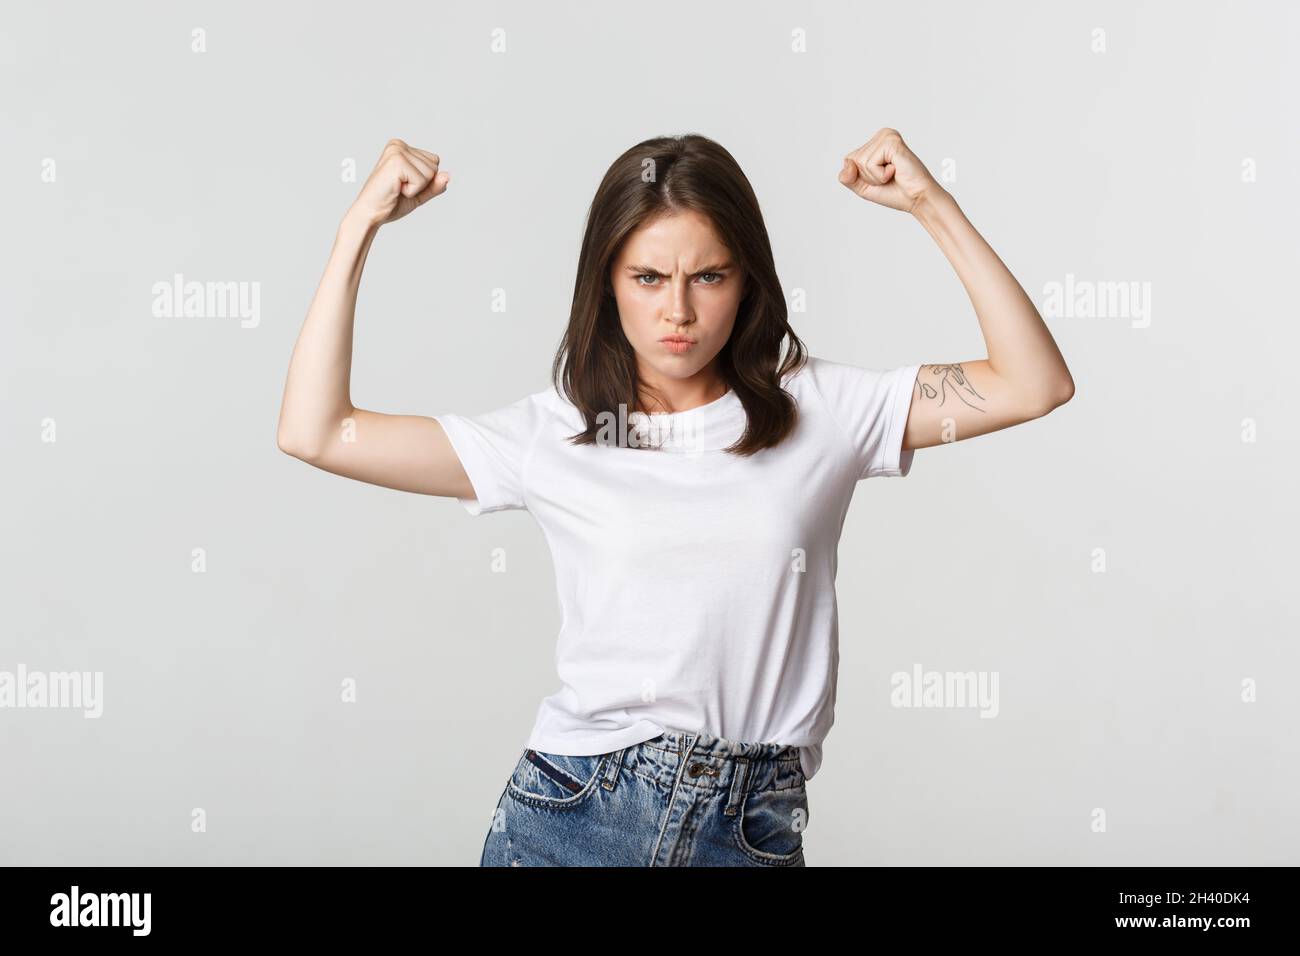 Serious-looking confident brunette girl flex biceps, showing strengths Stock Photo